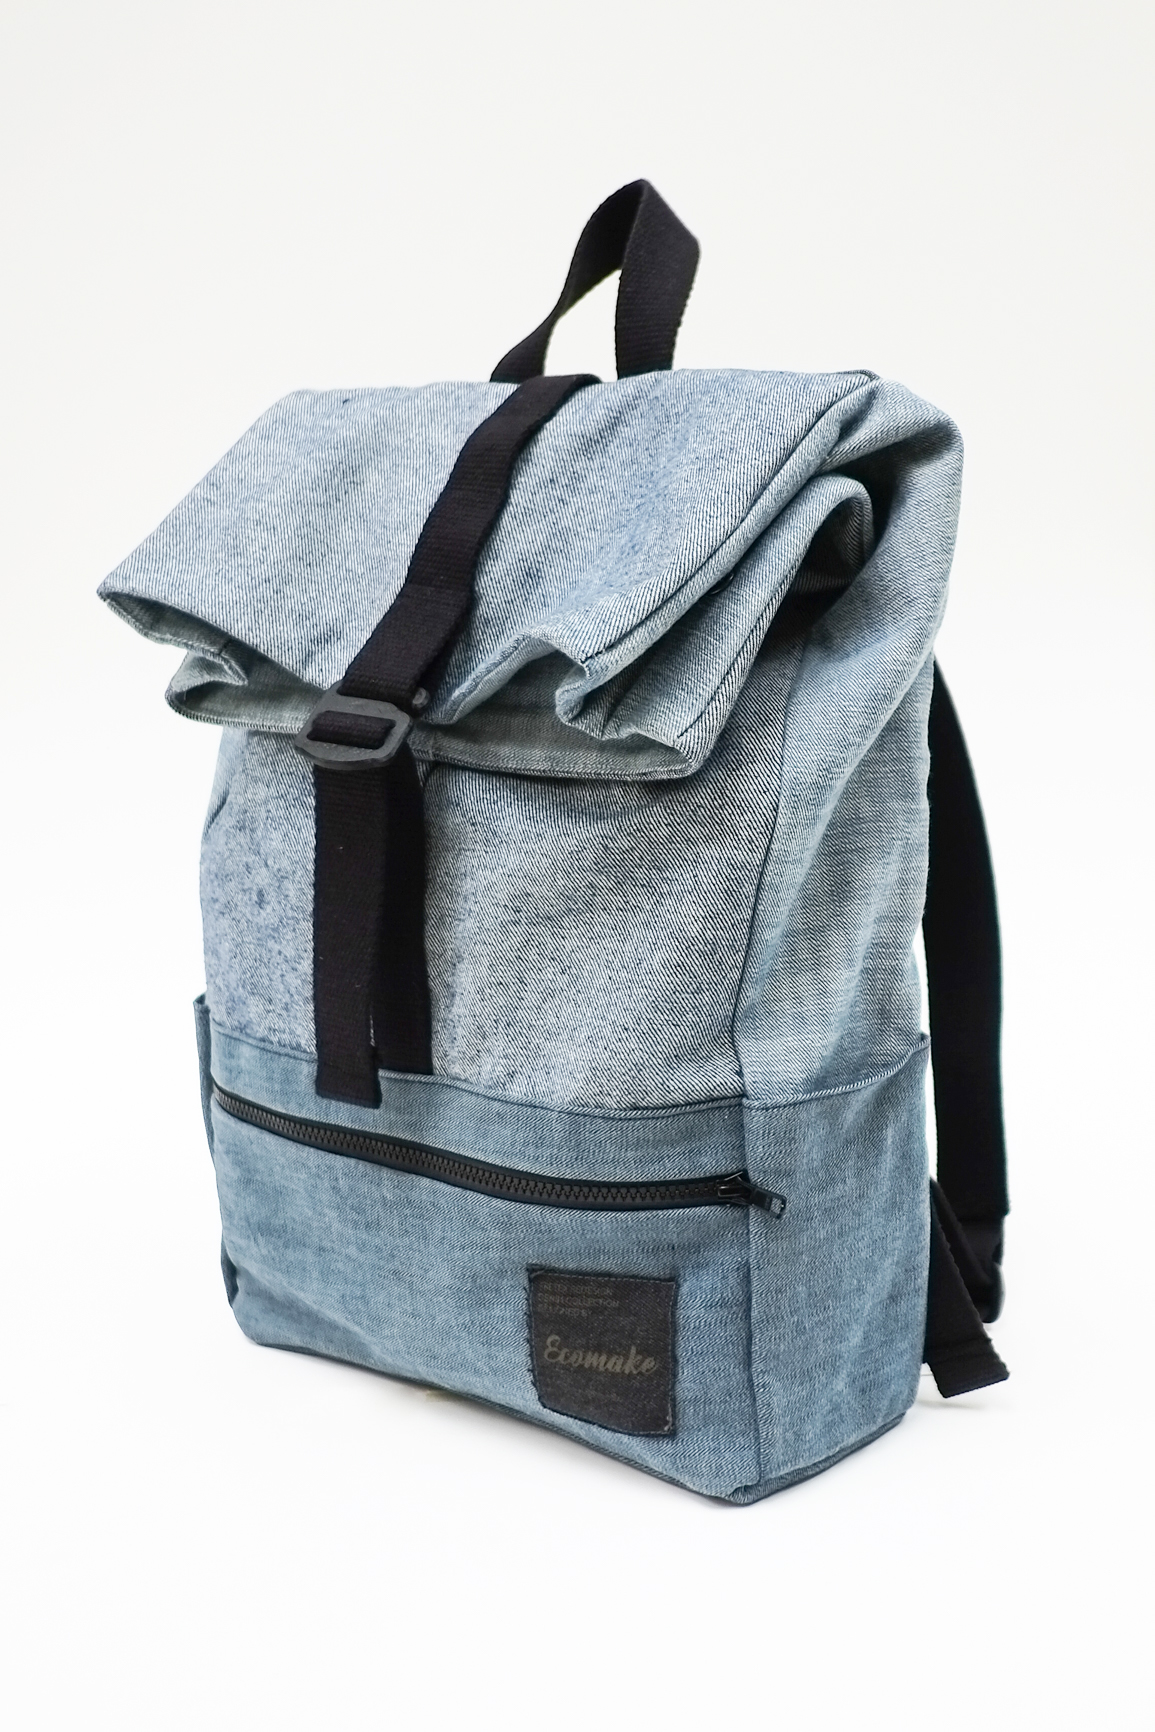 redesign ecomake Fretex reuse recycle Denim bowtie backpack eco ecofriendly